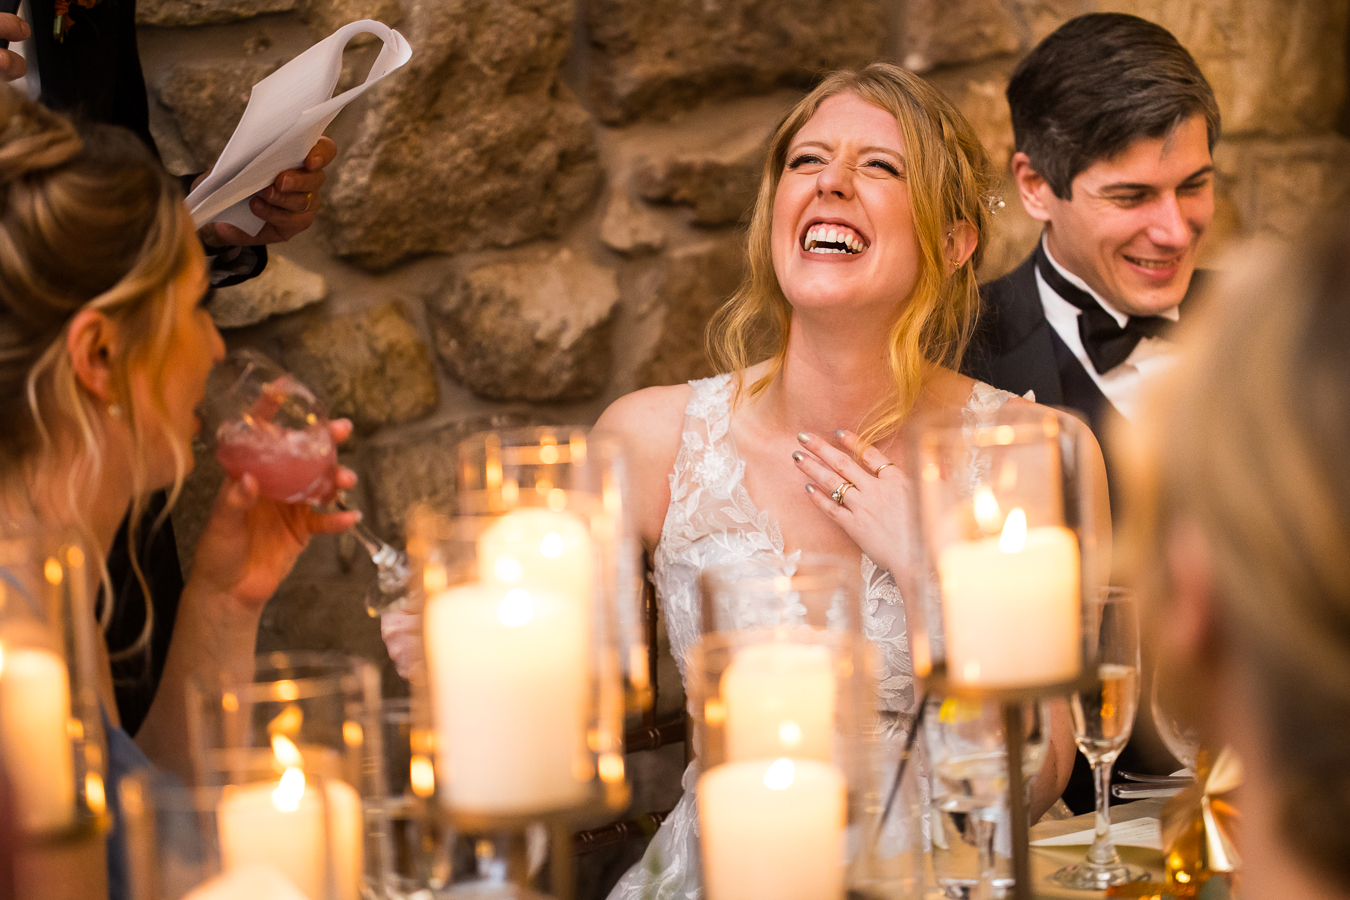 image of the bride as she smiles and laughs with her hand on her chest as her friends and family share their heartfelt speeches during the wedding traditions portion of the reception 